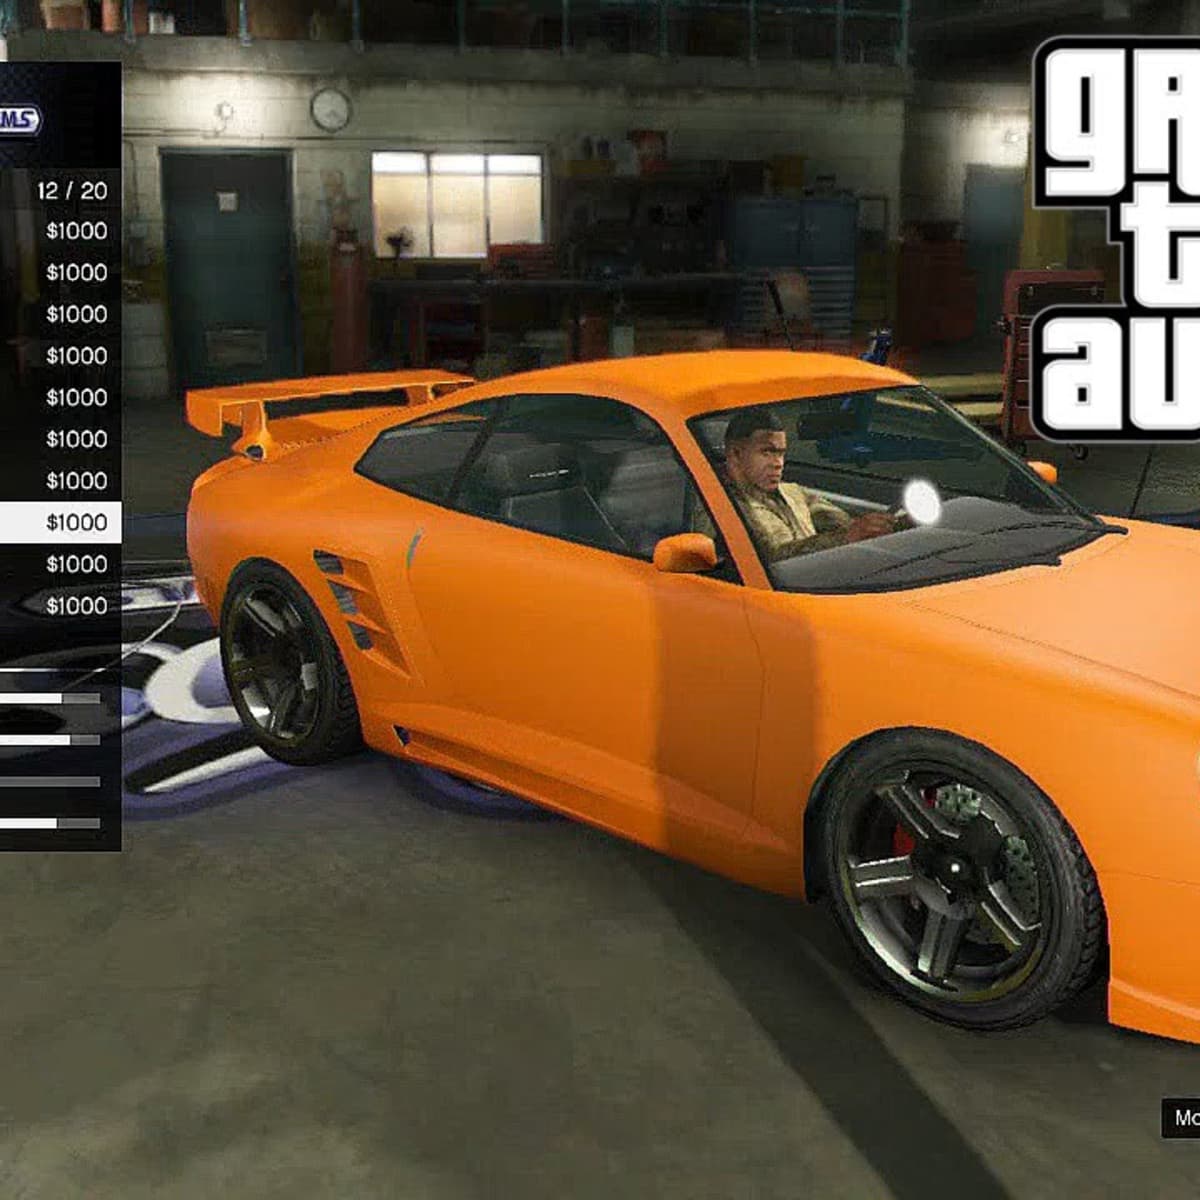 Grand Theft Auto Online Car Upgrades For Better Performance To Win Races Gta V Car Customization Levelskip